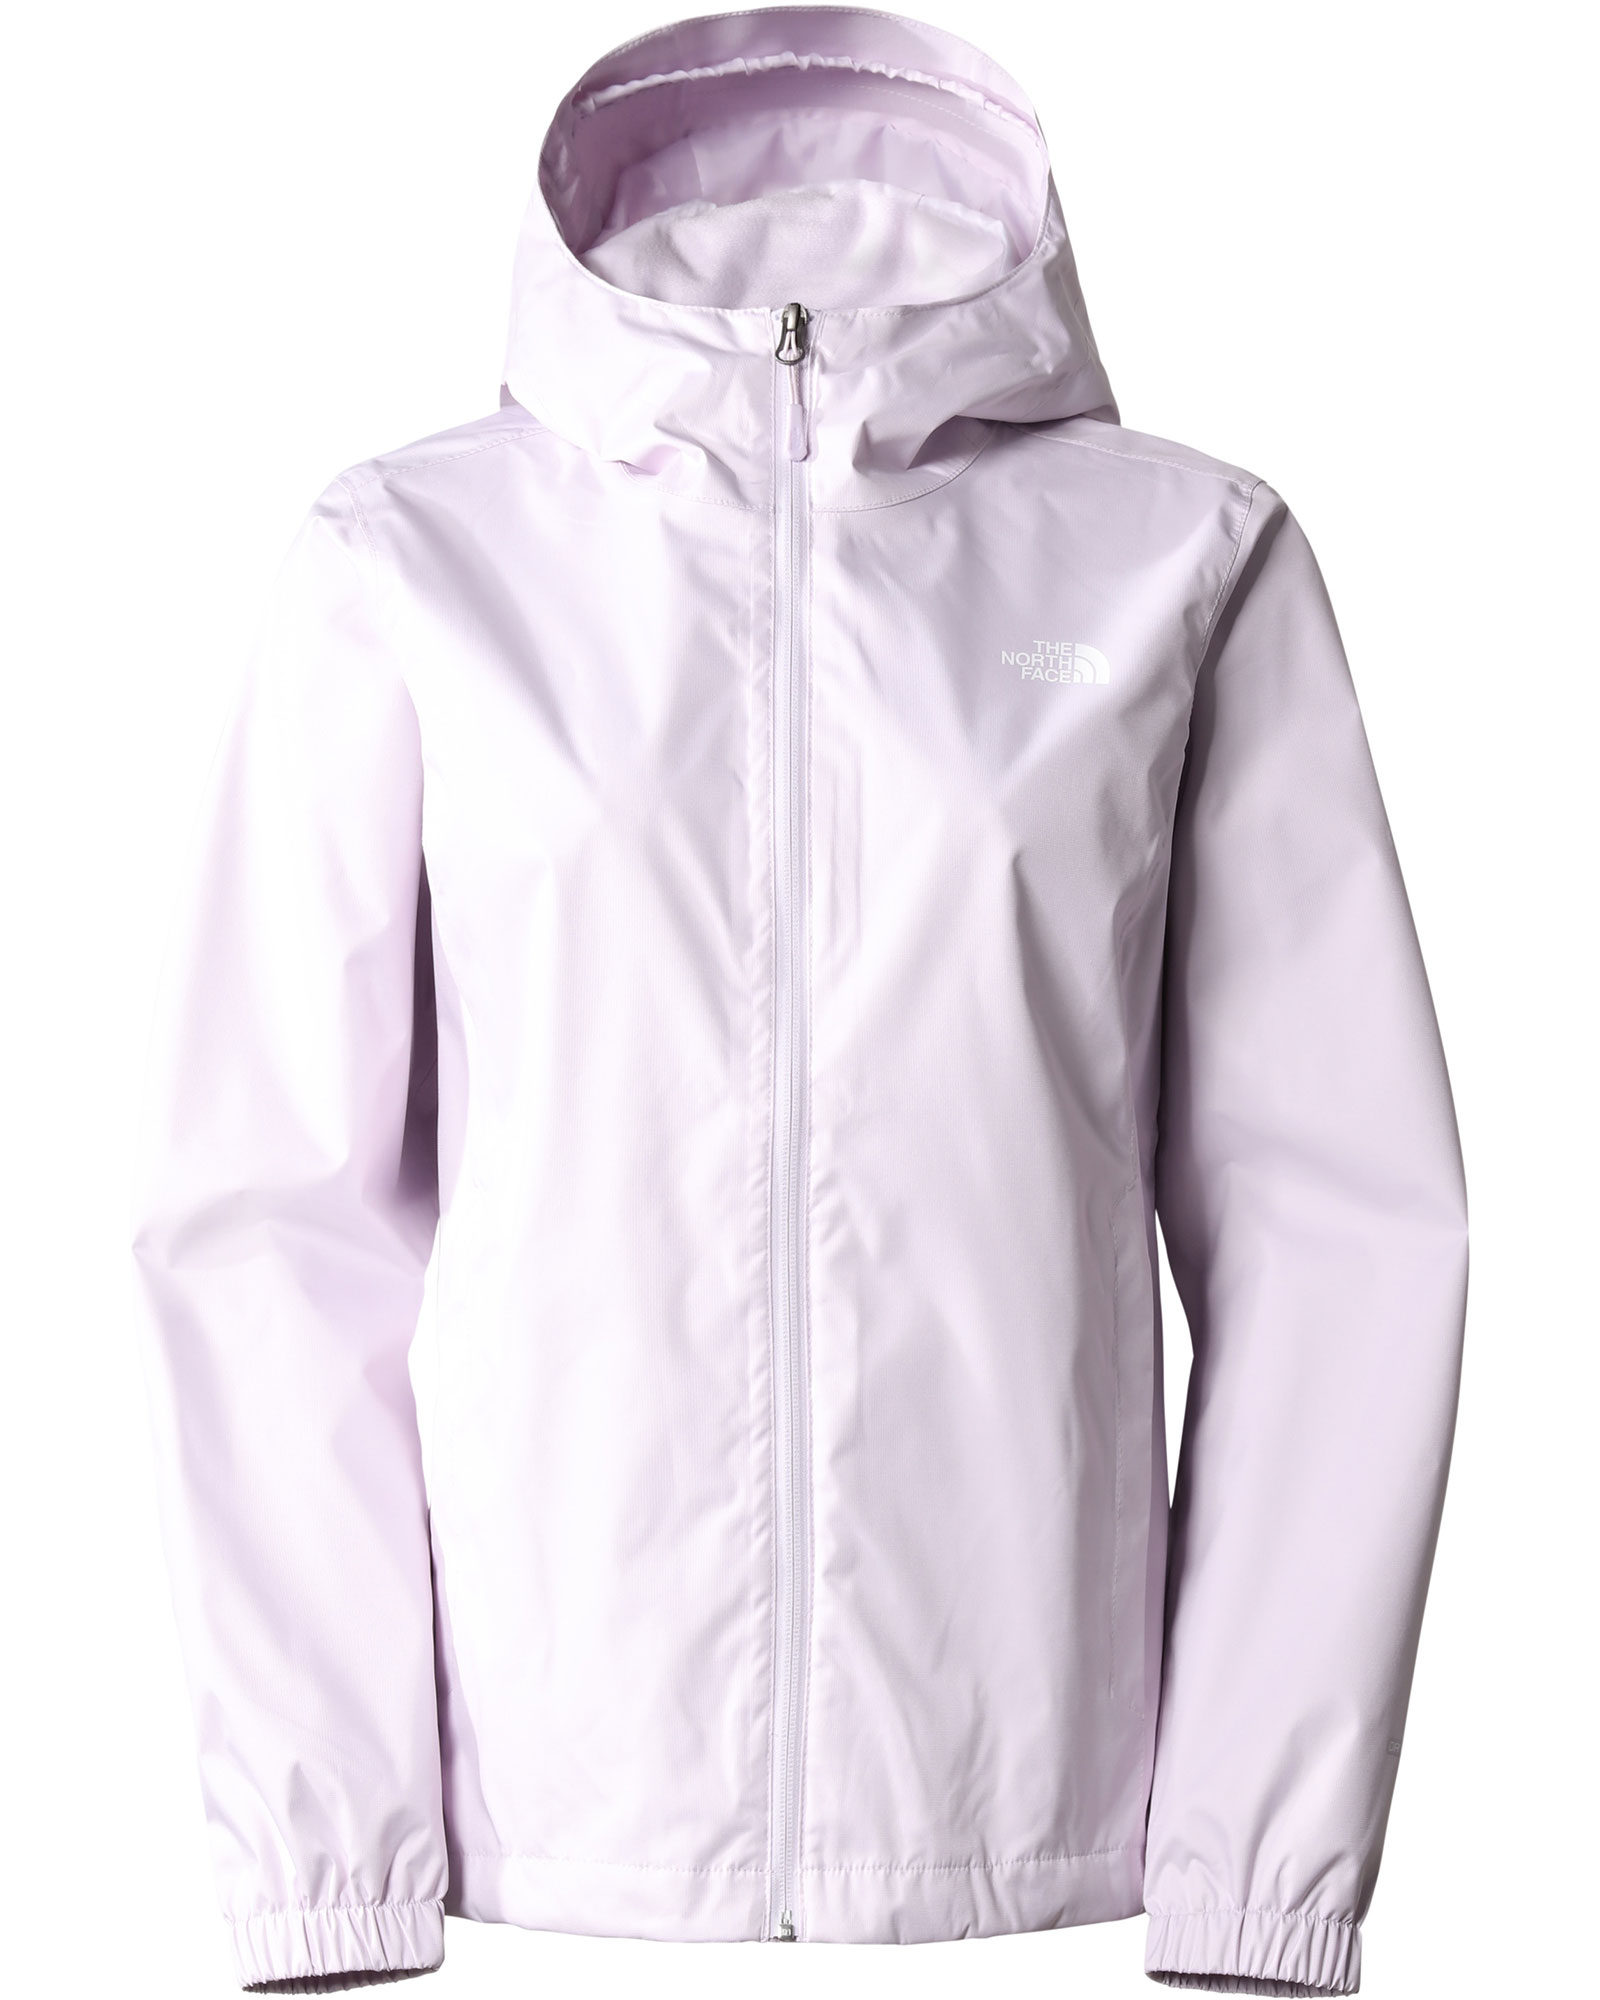 The North Face Quest DryVent Women’s Jacket - Lavender Fog XS